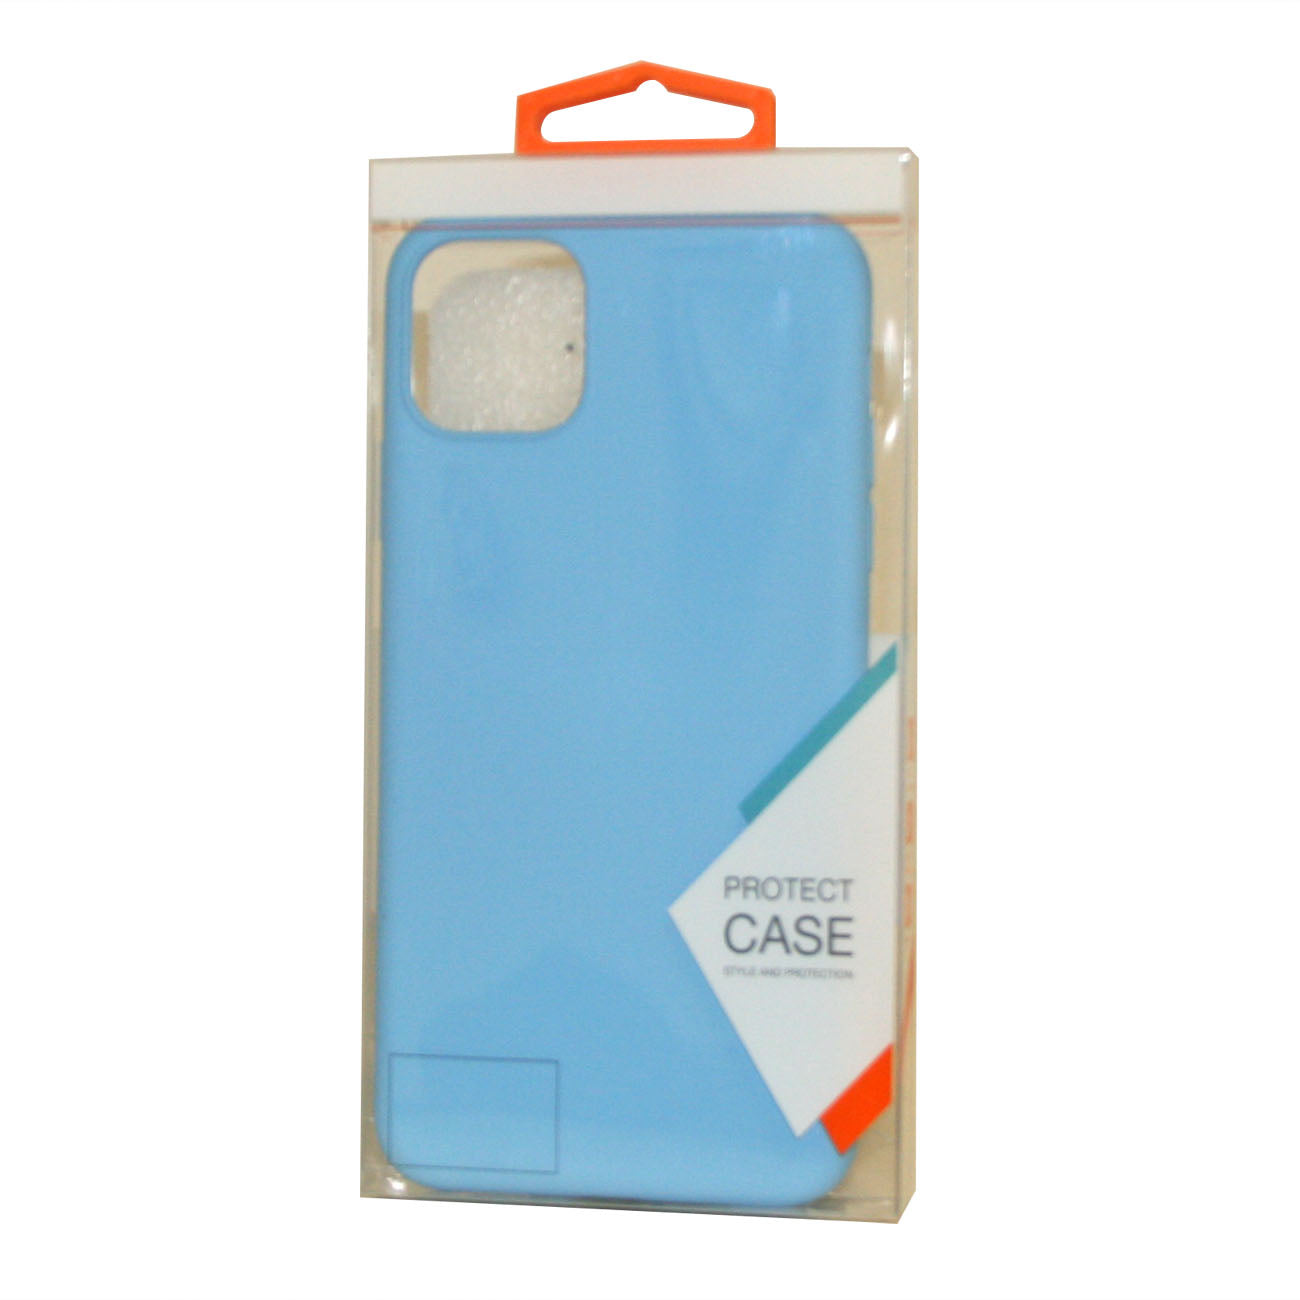 Apple iPhone 11 Pro Max Gummy Cases In Blue